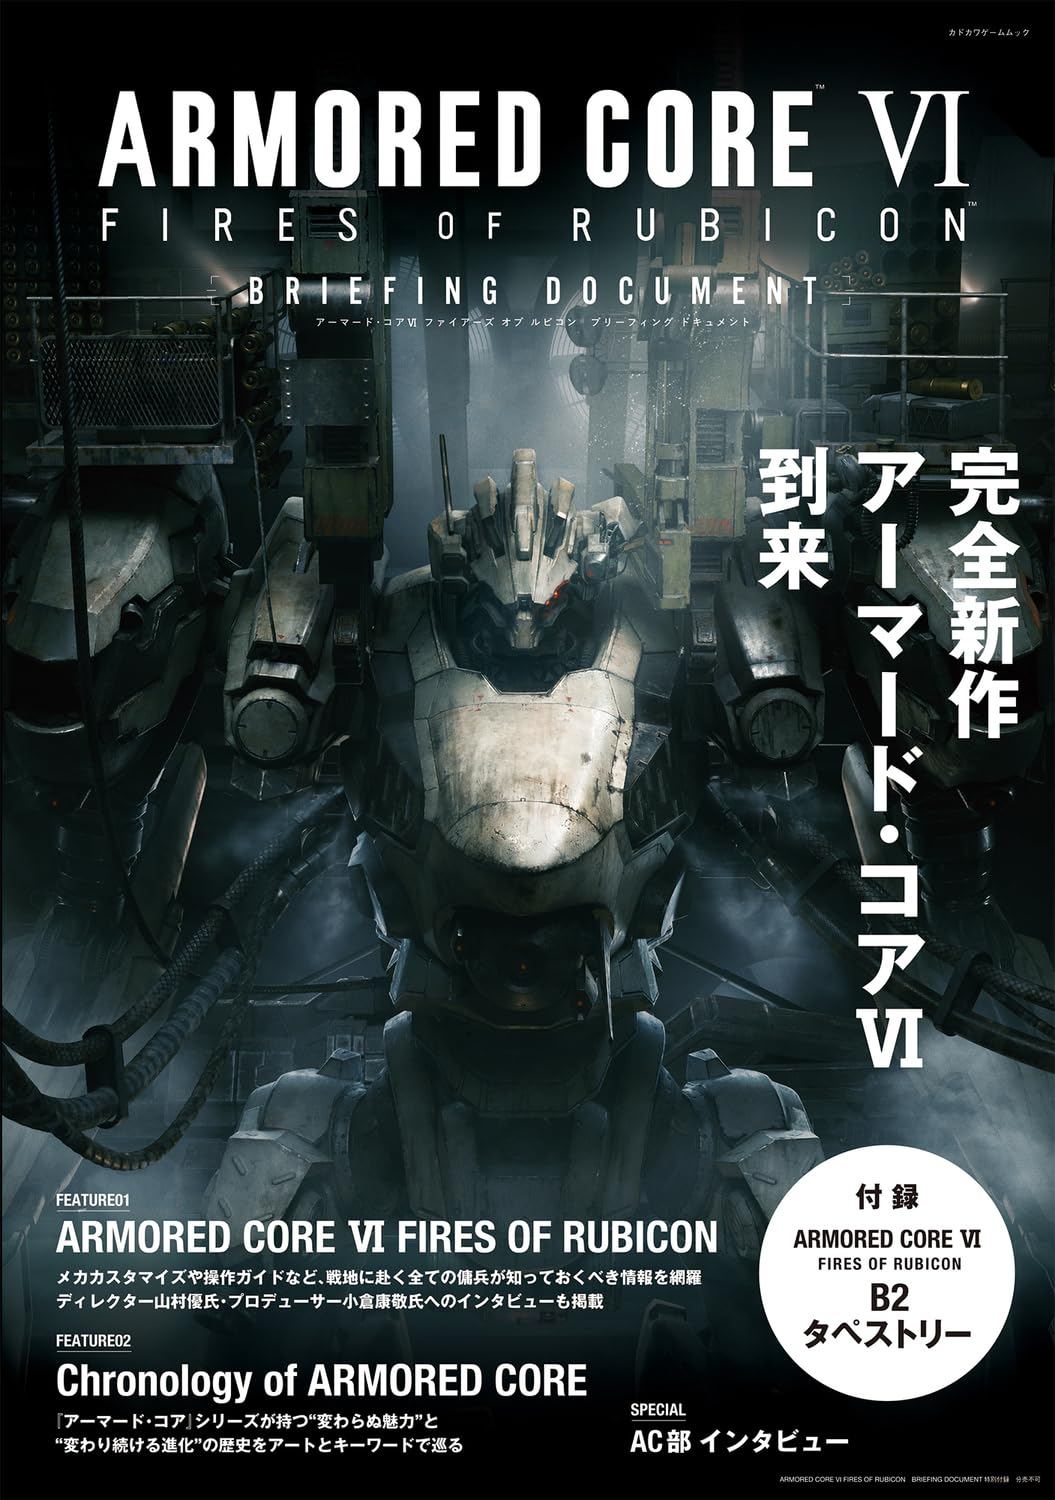 https://s.pacn.ws/1/p/16a/armored-core-vi-fires-of-rubicon-briefing-document-761151.2.jpg?v=rxqdn6